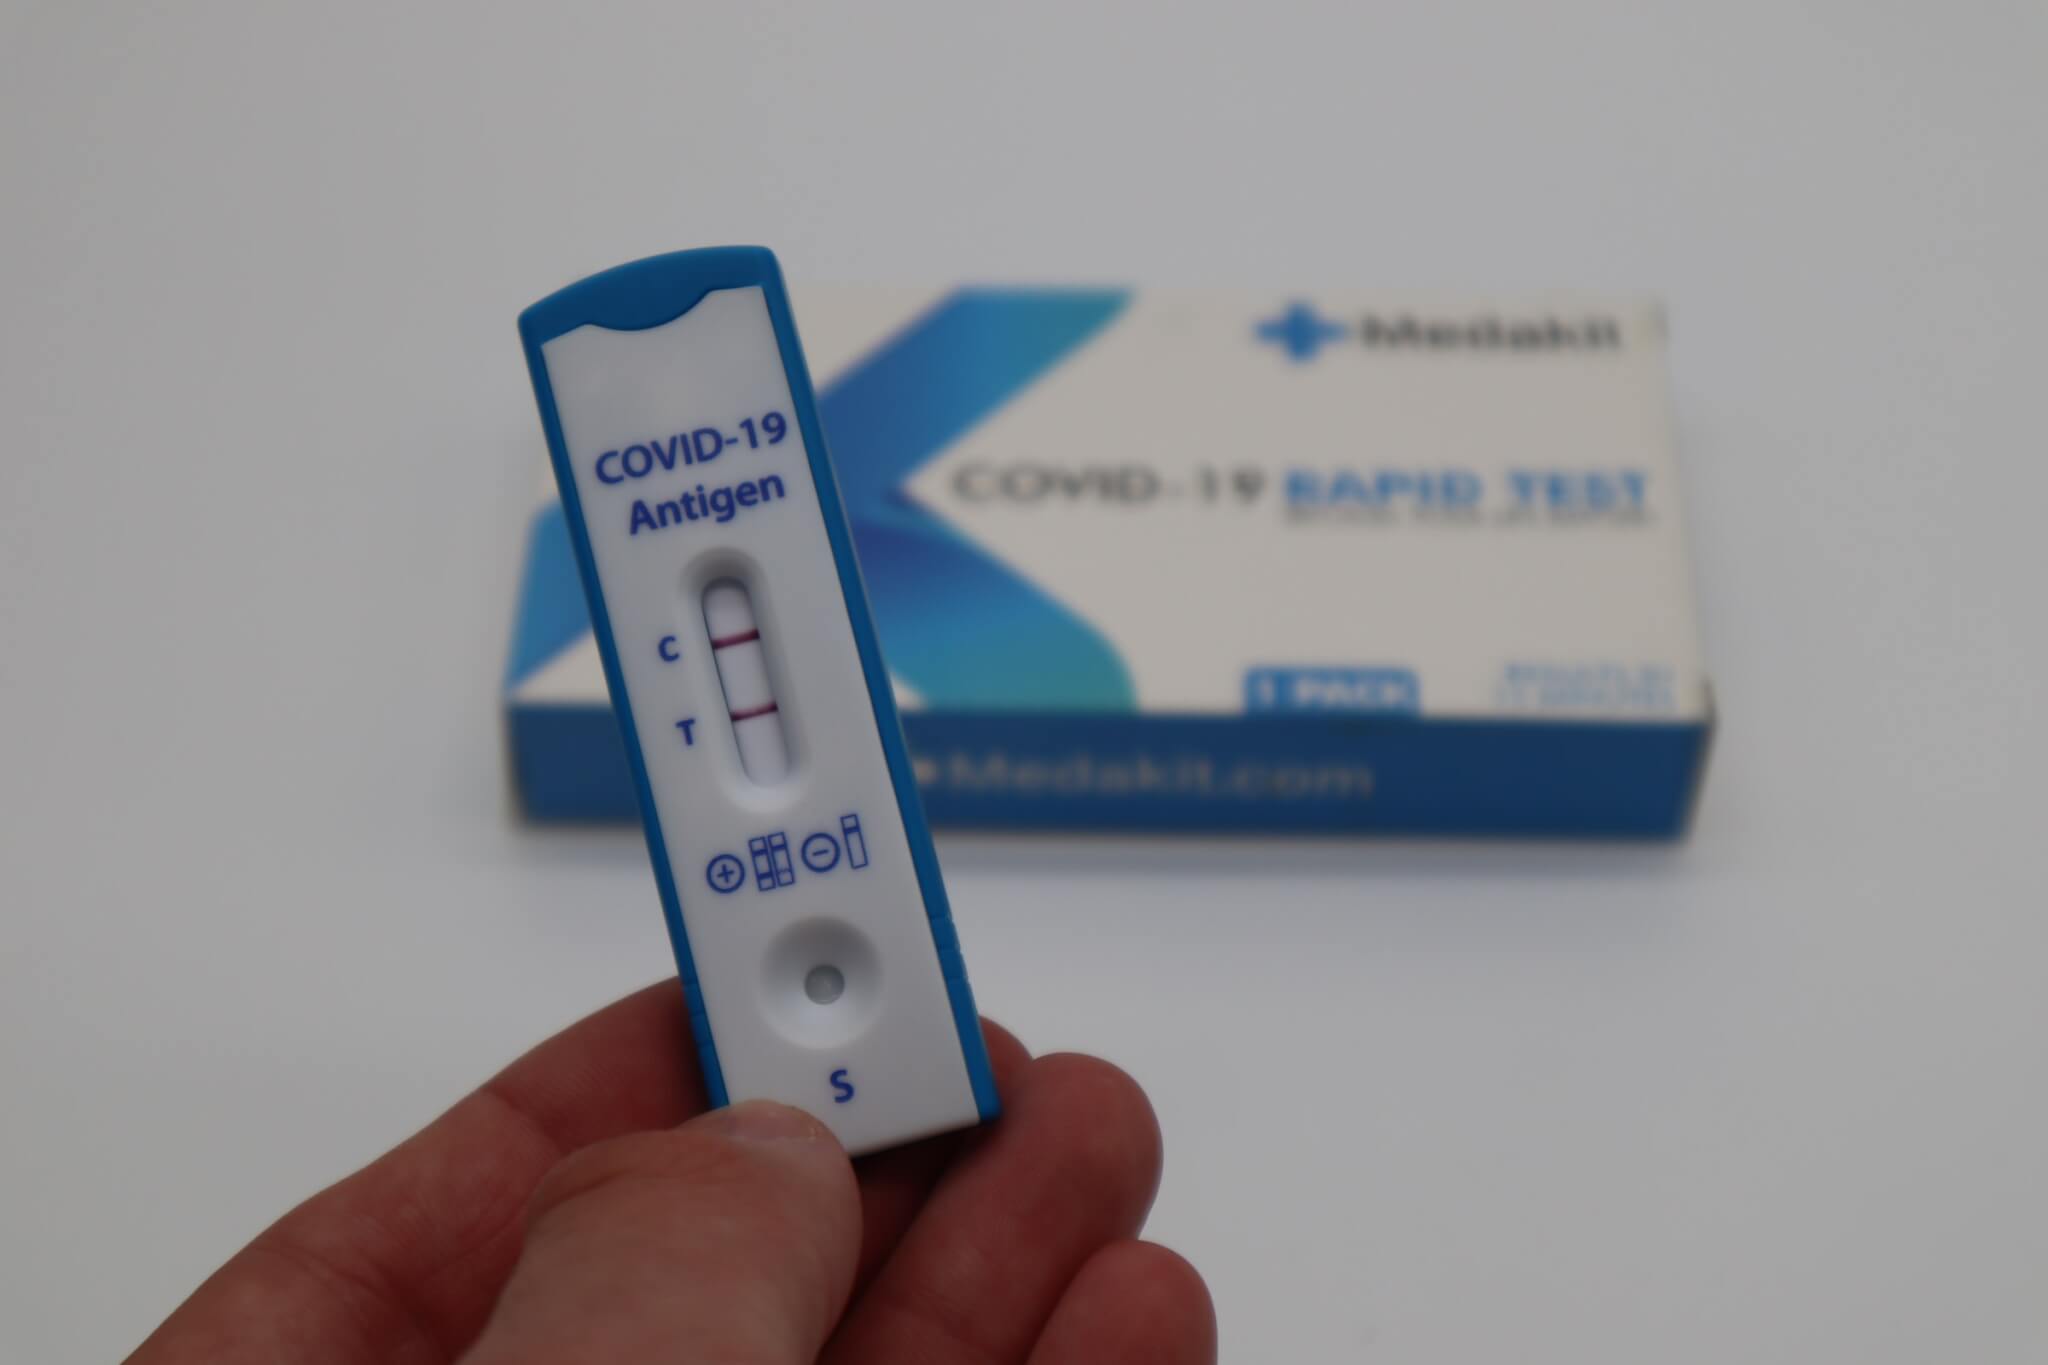 Rapid COVID antigen tests show a 'very low' rate of false positive results